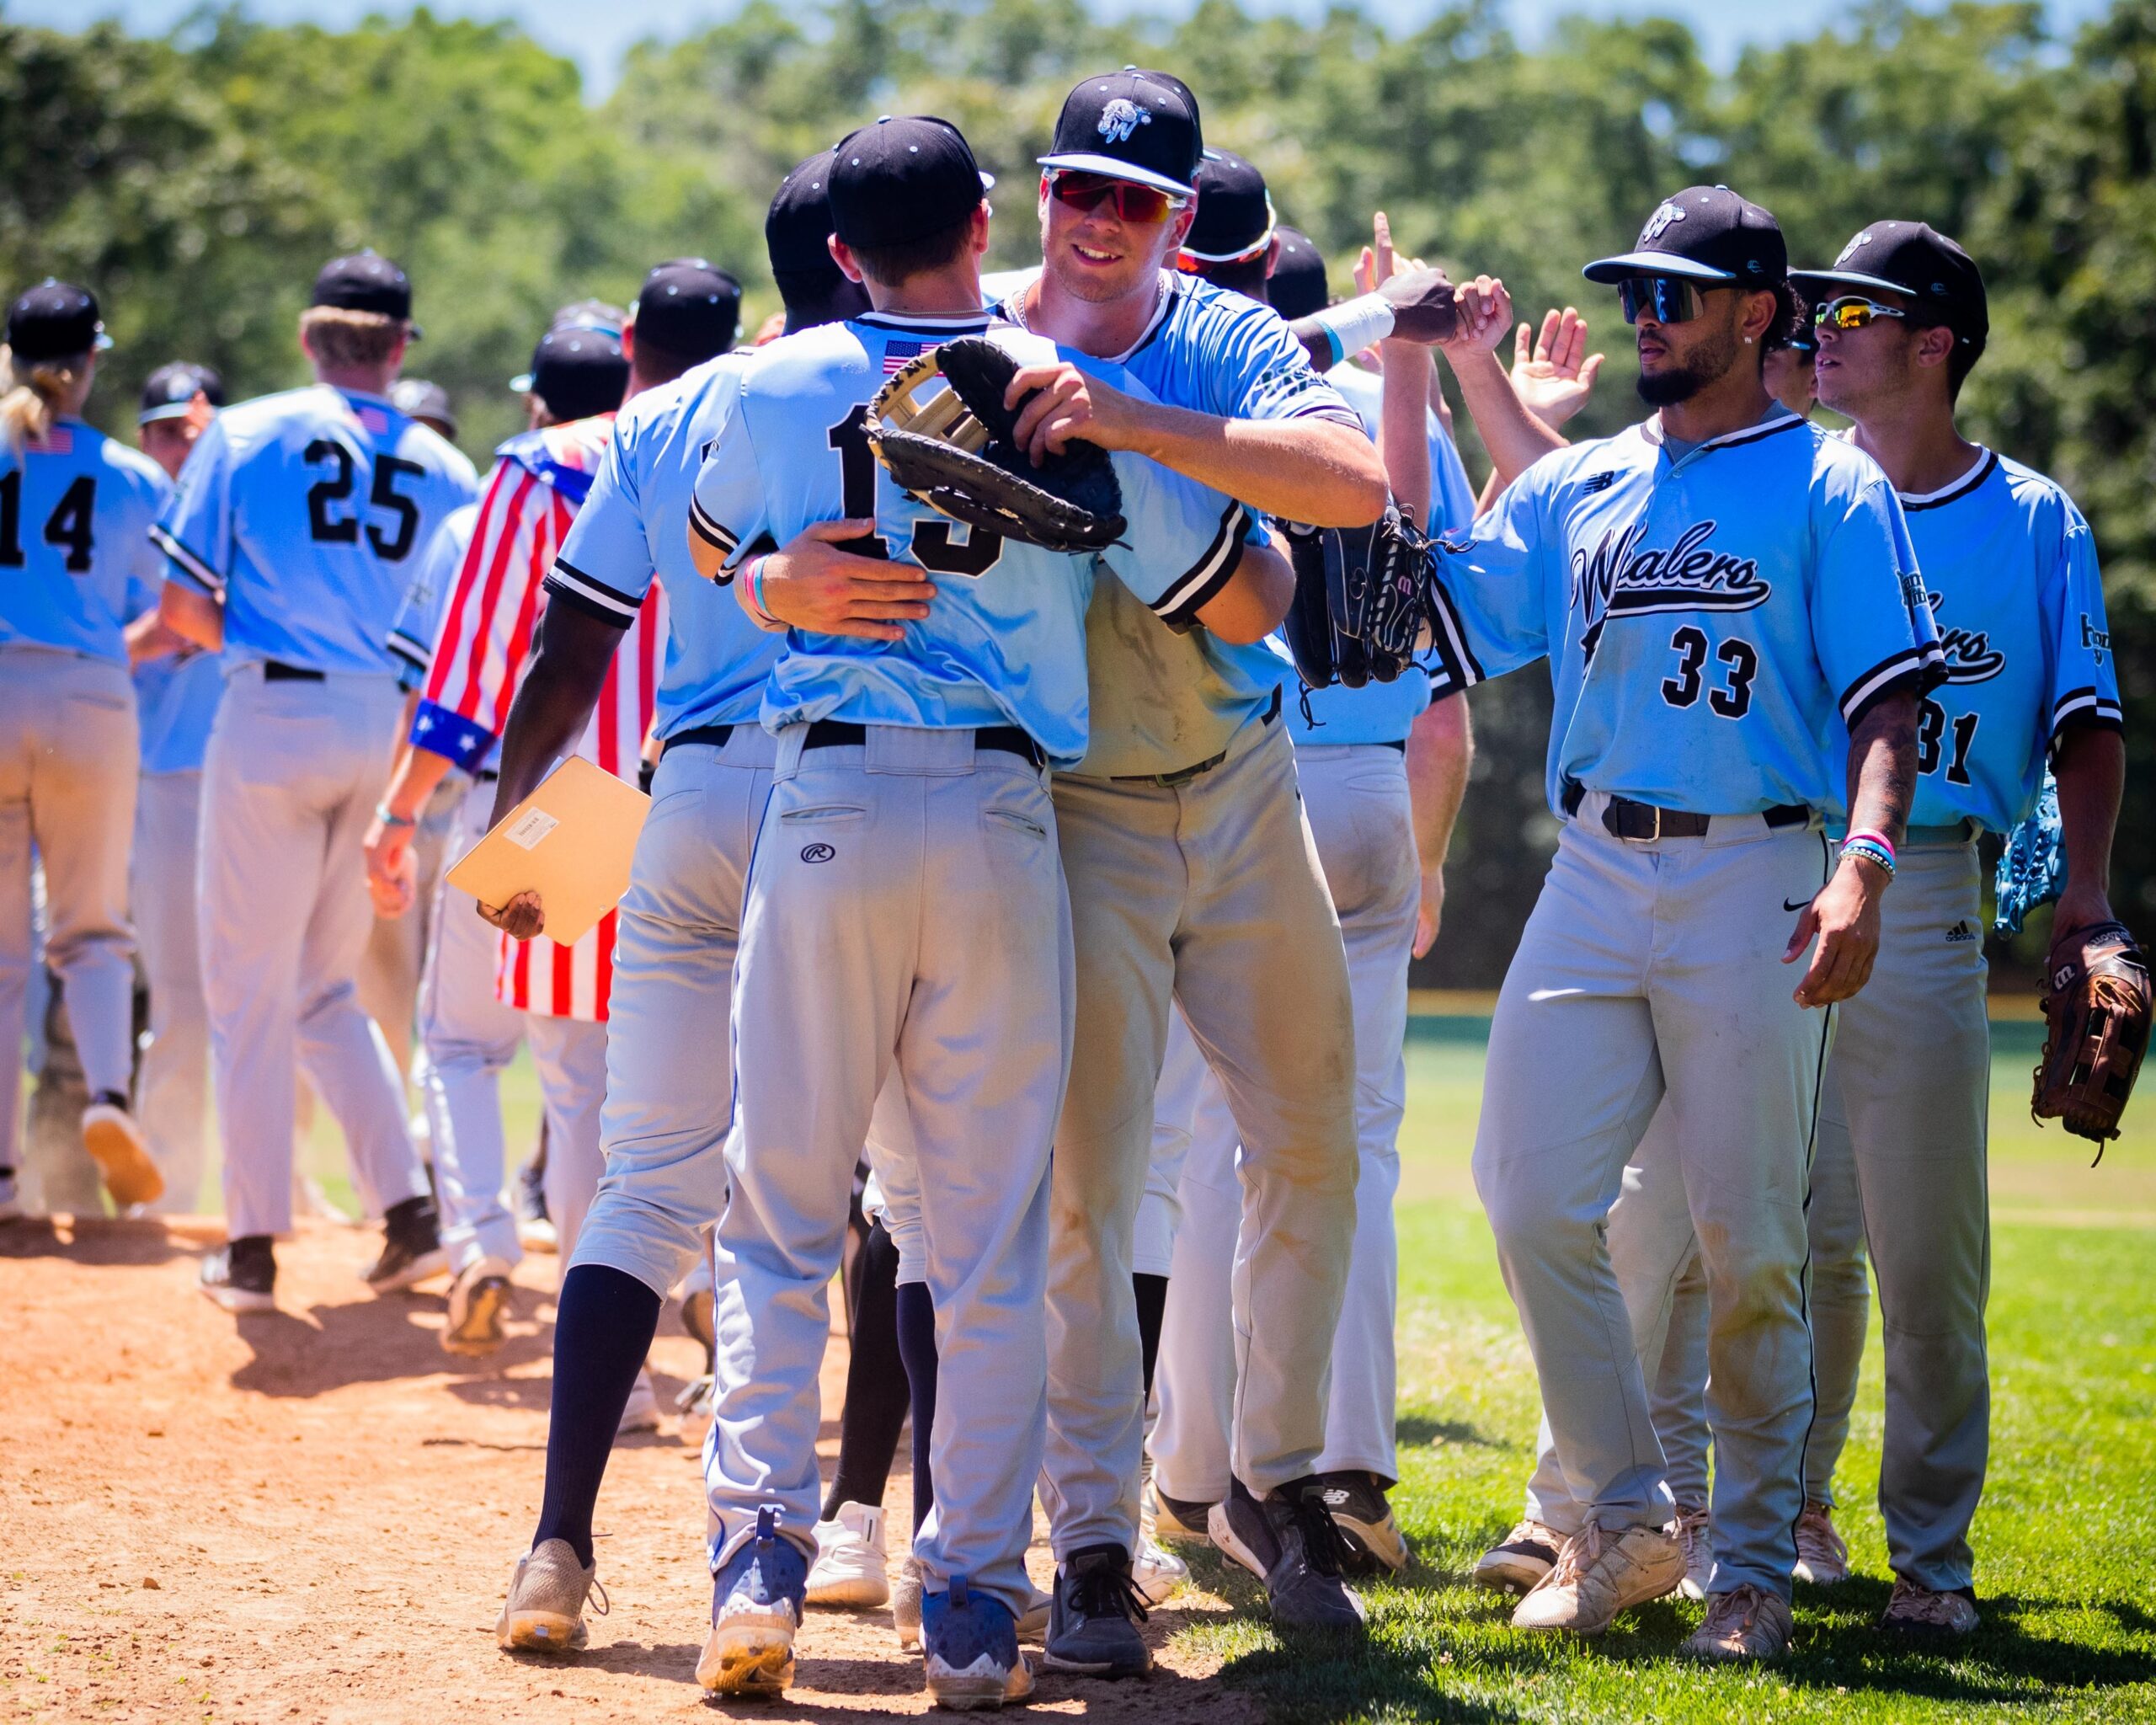 The Whalers congratulate each other after their 5-2 victory over the Bucks on Monday.    DEMETRIUS KAZANAS